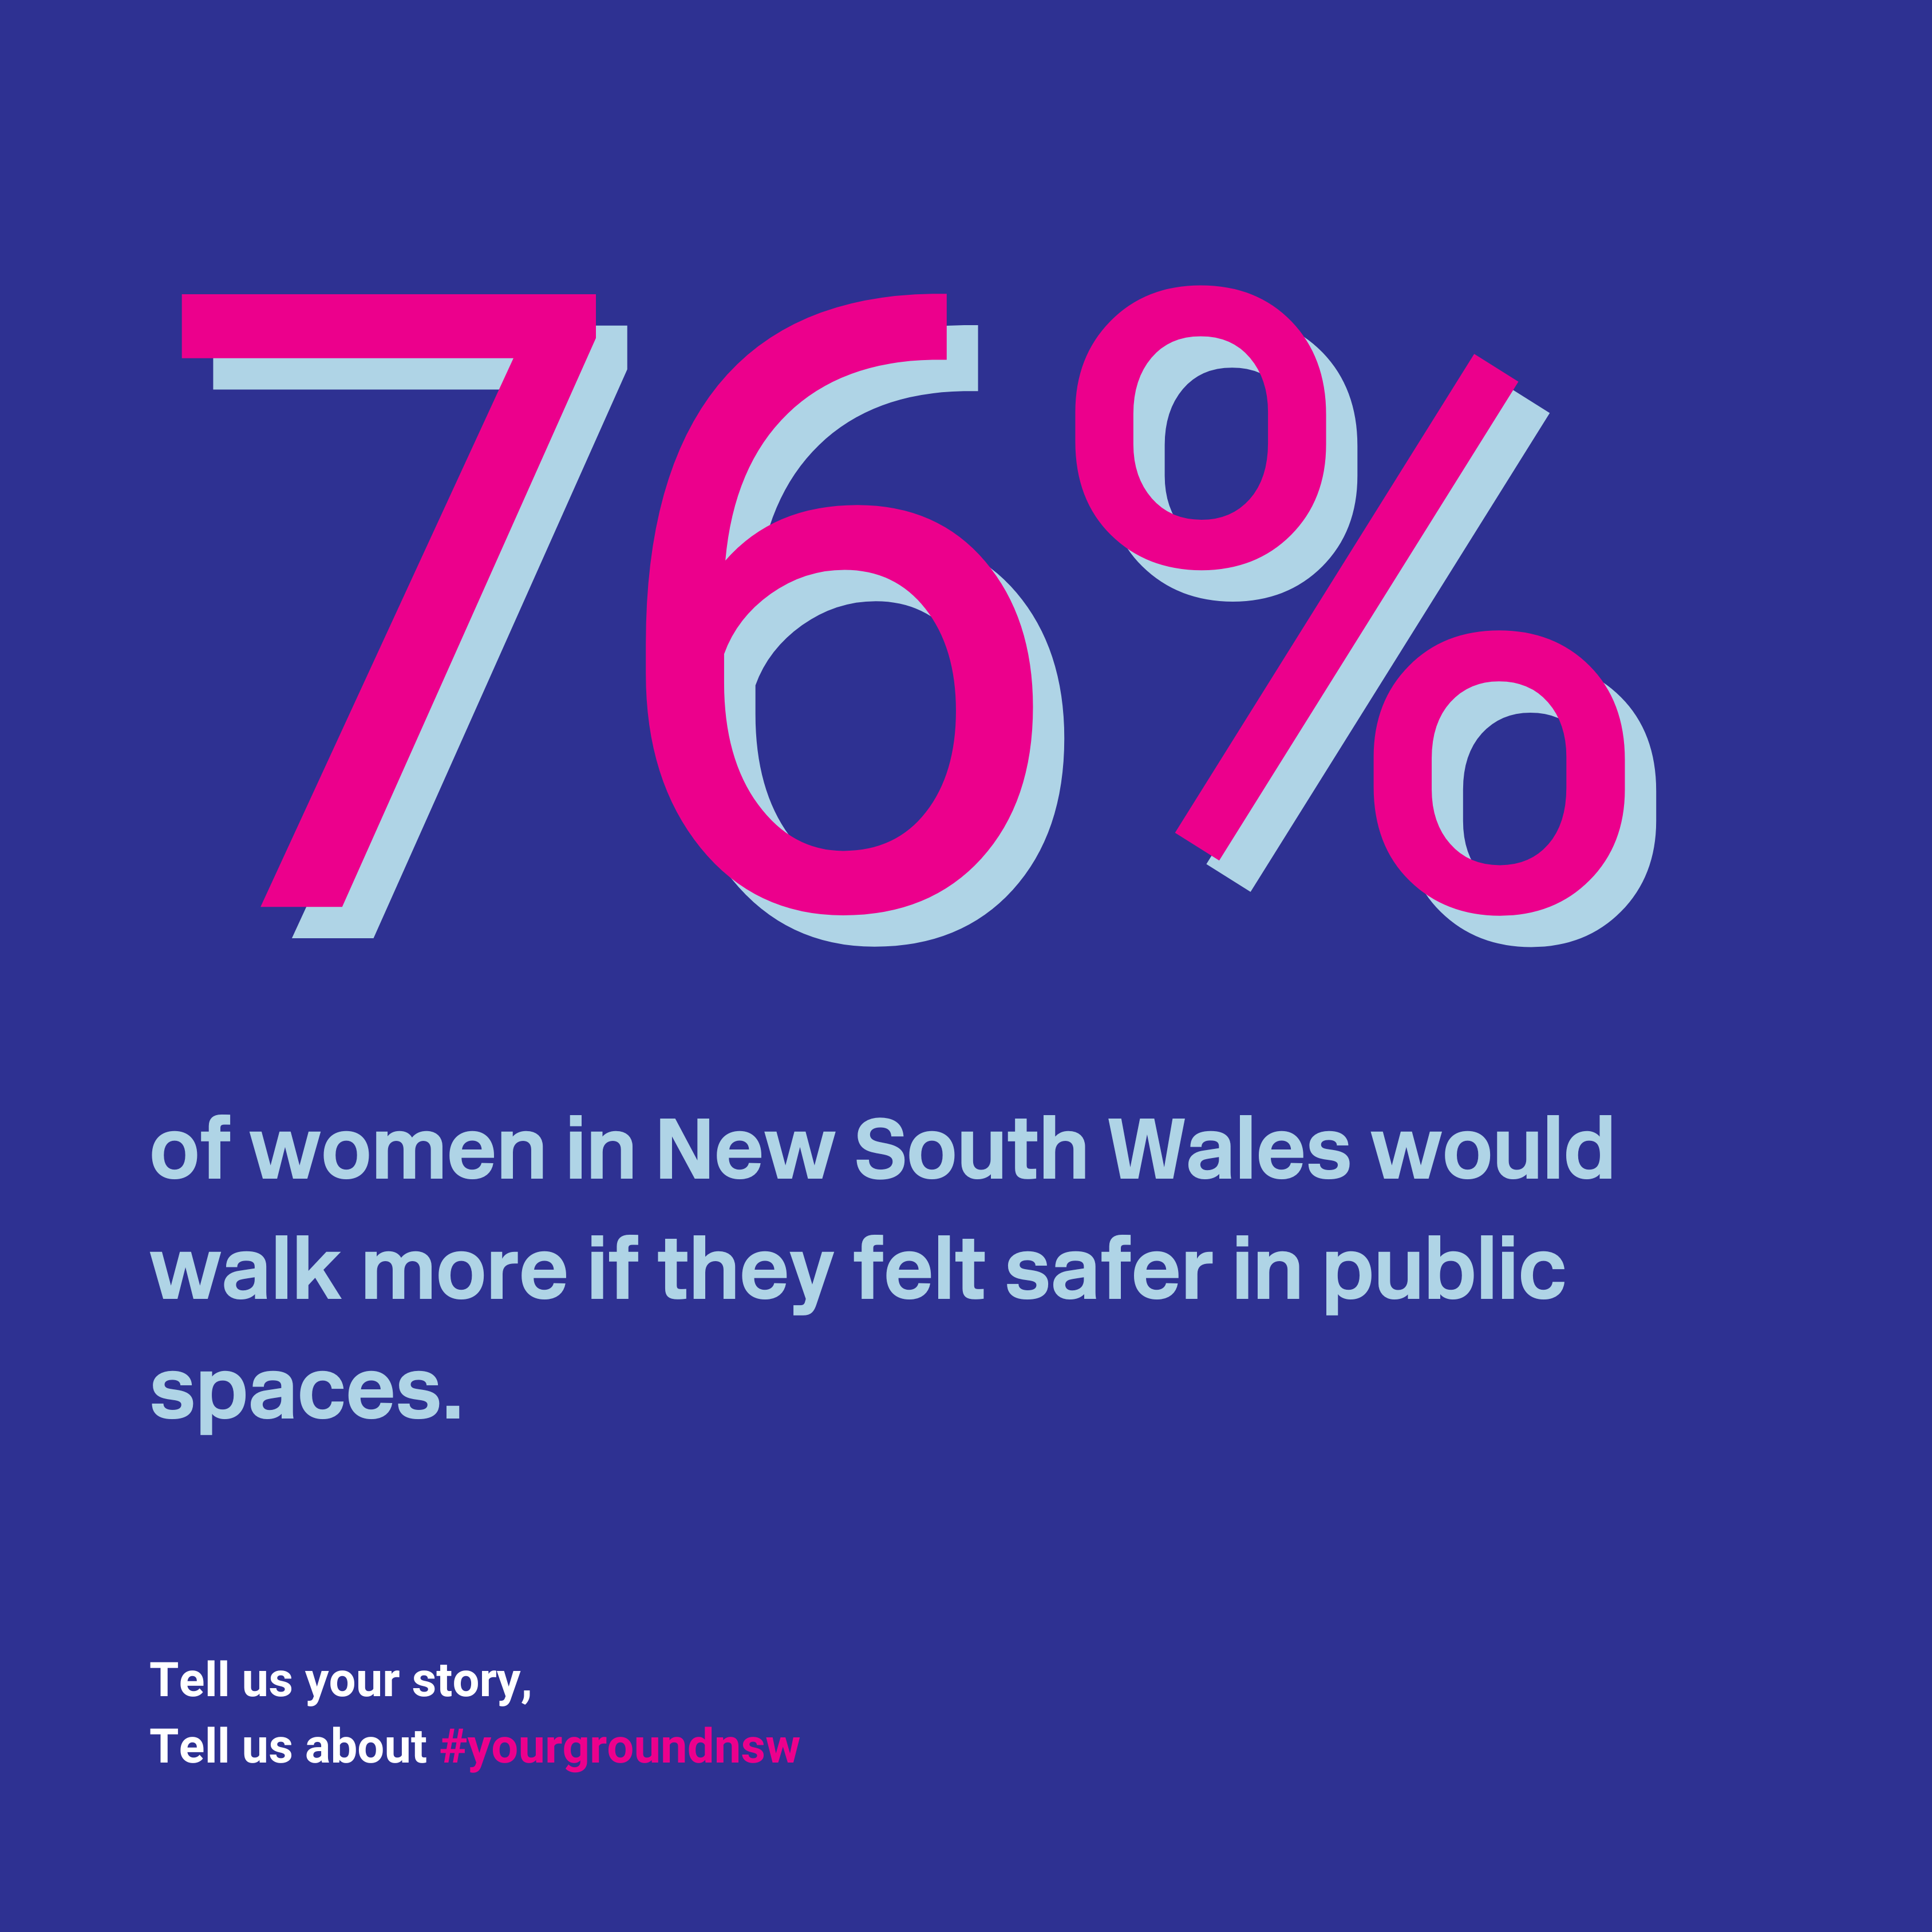 Help map women’s safety in NSW